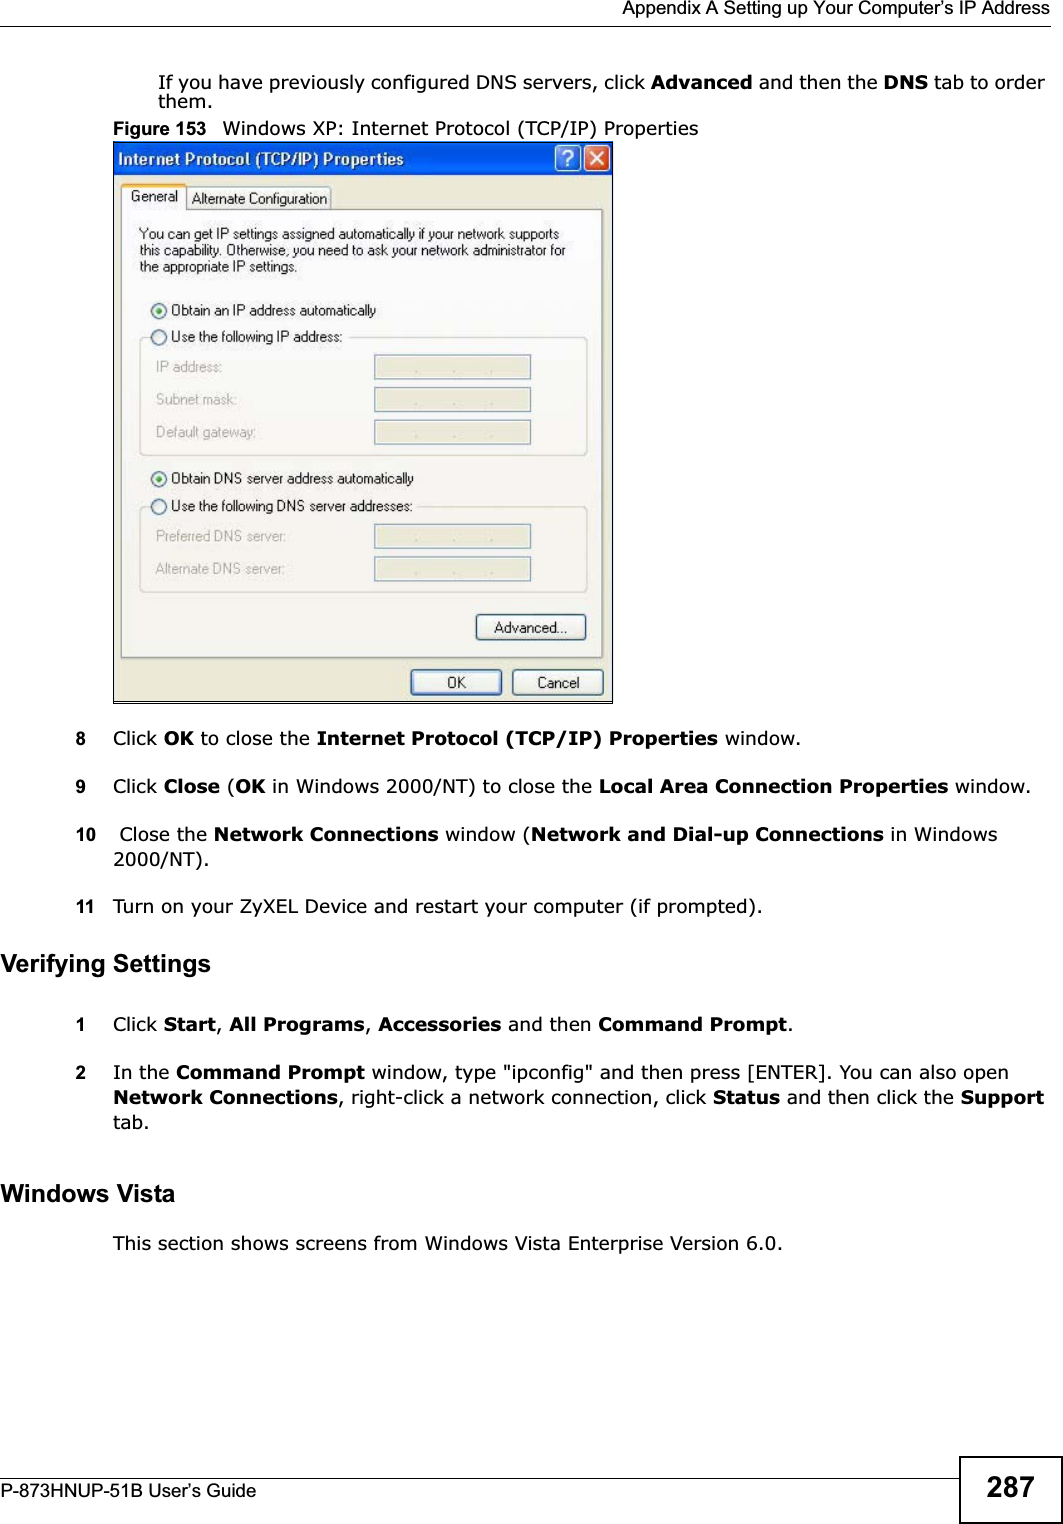  Appendix A Setting up Your Computer’s IP AddressP-873HNUP-51B User’s Guide 287If you have previously configured DNS servers, click Advanced and then the DNS tab to order them.Figure 153   Windows XP: Internet Protocol (TCP/IP) Properties8Click OK to close the Internet Protocol (TCP/IP) Properties window.9Click Close (OK in Windows 2000/NT) to close the Local Area Connection Properties window.10  Close the Network Connections window (Network and Dial-up Connections in Windows 2000/NT).11 Turn on your ZyXEL Device and restart your computer (if prompted).Verifying Settings1Click Start,All Programs,Accessories and then Command Prompt.2In the Command Prompt window, type &quot;ipconfig&quot; and then press [ENTER]. You can also open Network Connections, right-click a network connection, click Status and then click the Support tab.Windows VistaThis section shows screens from Windows Vista Enterprise Version 6.0.